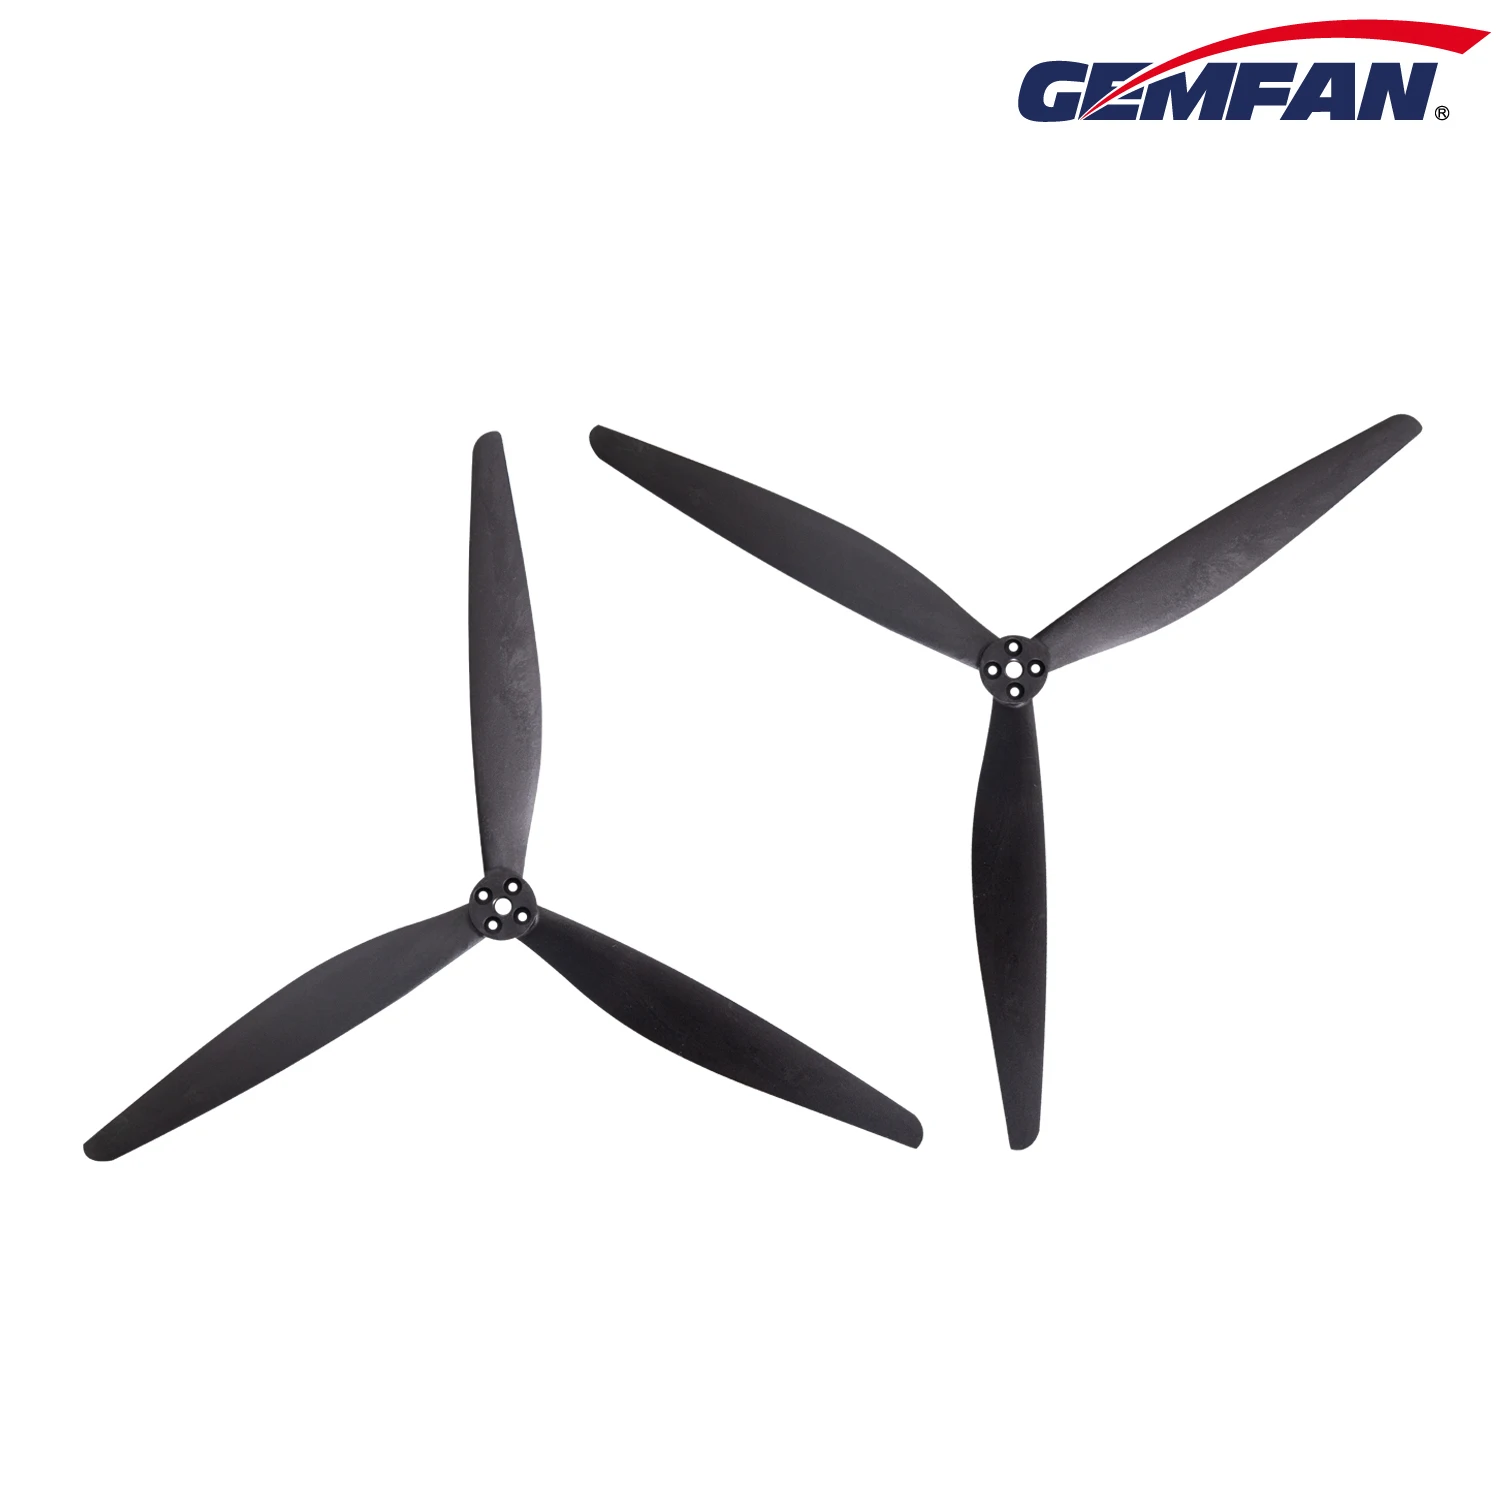 

1pair Gemfan X CLASS 1308-3 High Efficiency Propeller 5310-400kv 3 Blade Props FPV Racing Freestyle and Cinelifter Adapter